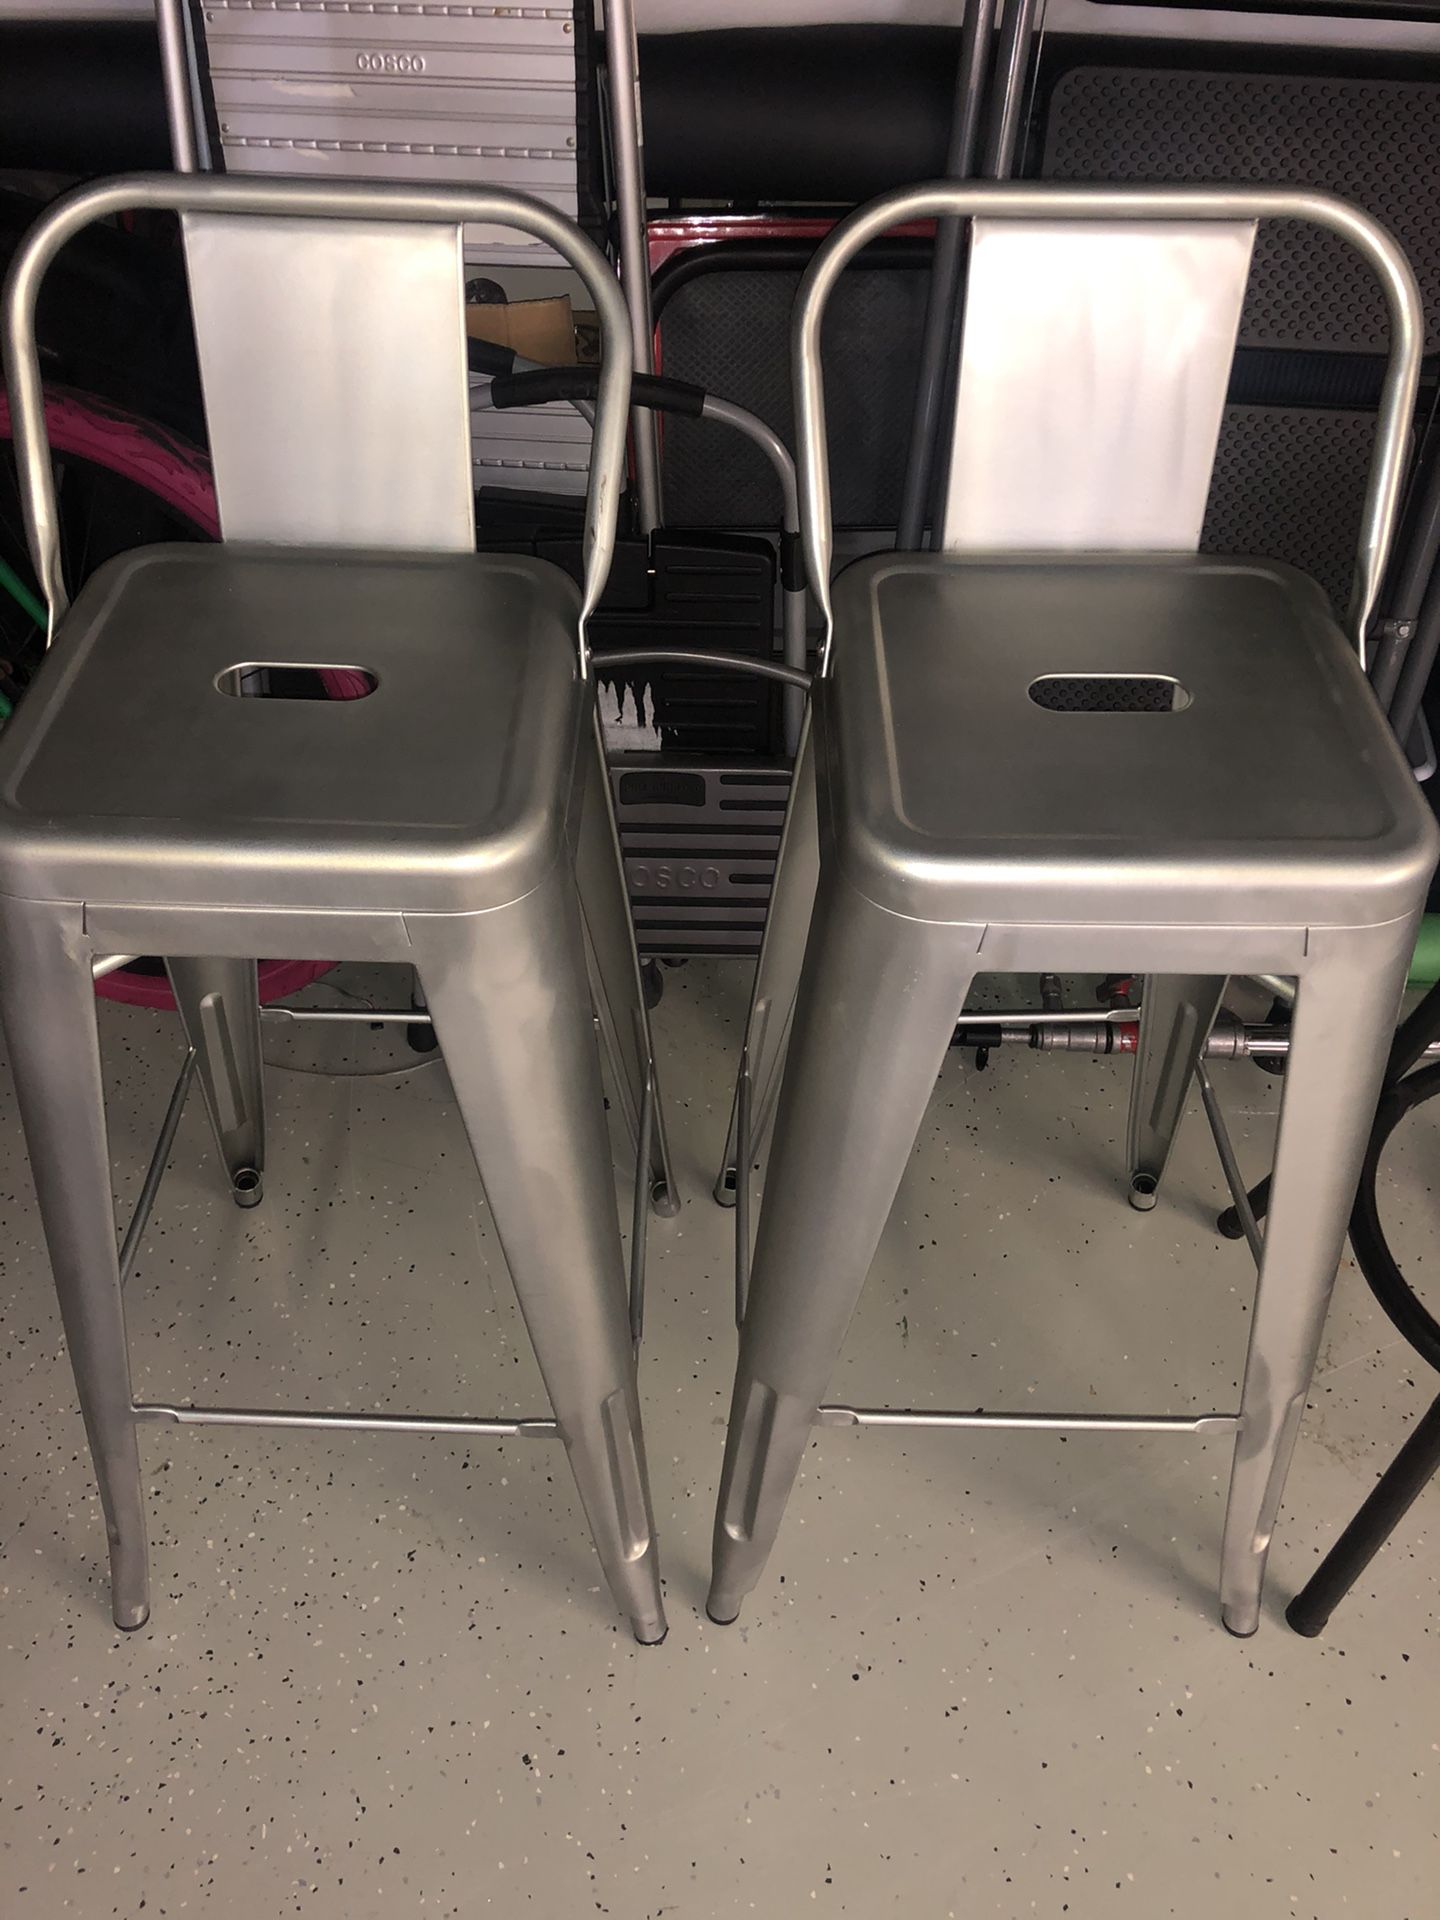 Stainless Bar Stools